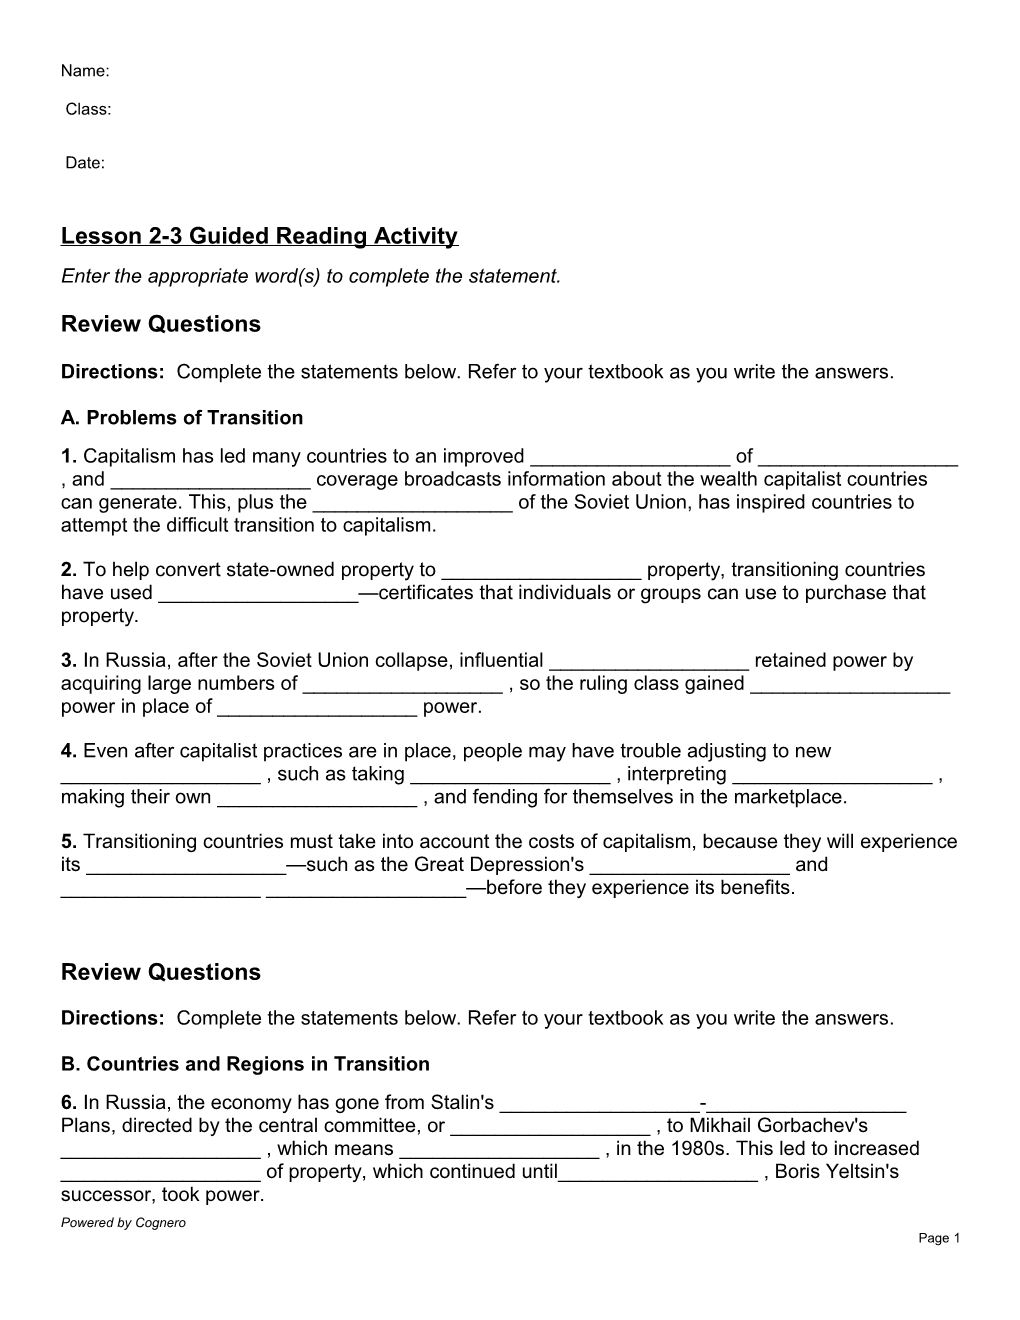 Lesson 2-3 Guided Reading Activity